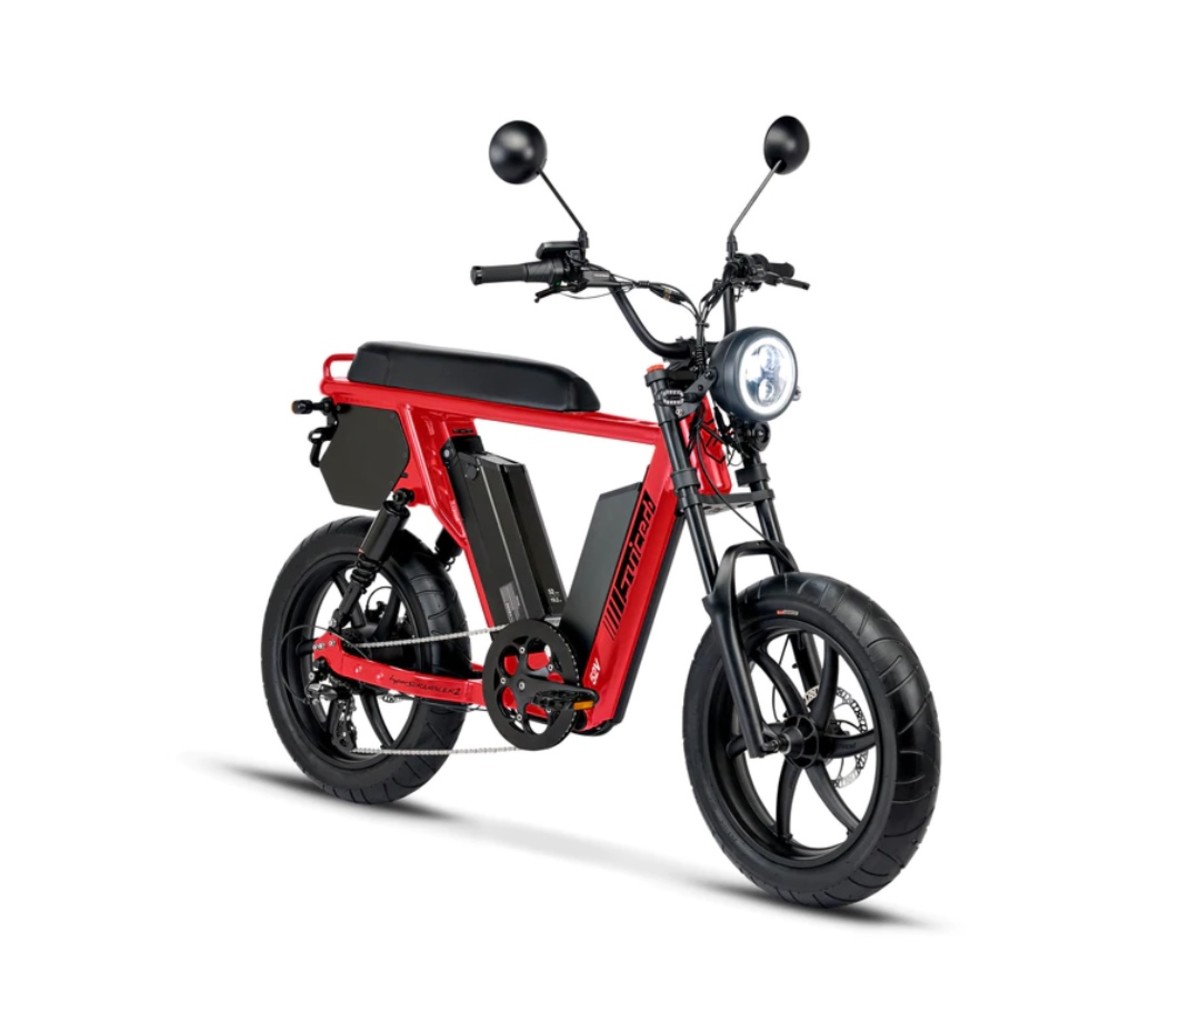 Packed with features, the Juiced HyperScrambler 2 is a street savvy e-machine.